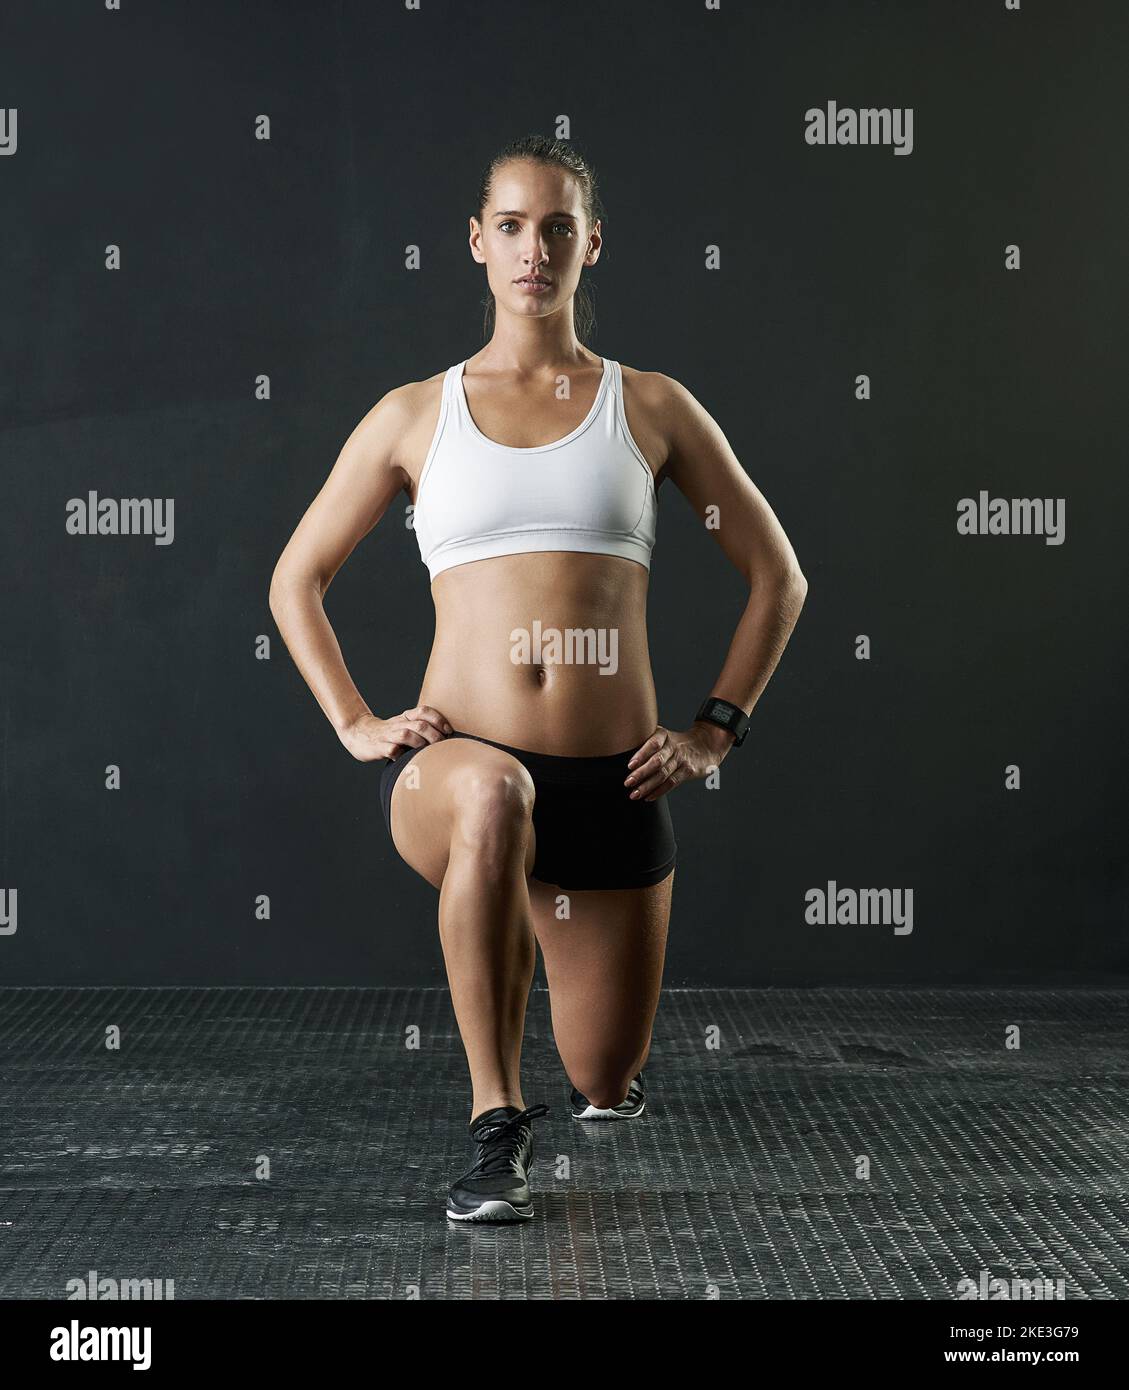 https://c8.alamy.com/comp/2KE3G79/lunging-her-way-towards-fitness-studio-portrait-of-an-attractive-young-woman-doing-lunges-against-a-dark-background-2KE3G79.jpg